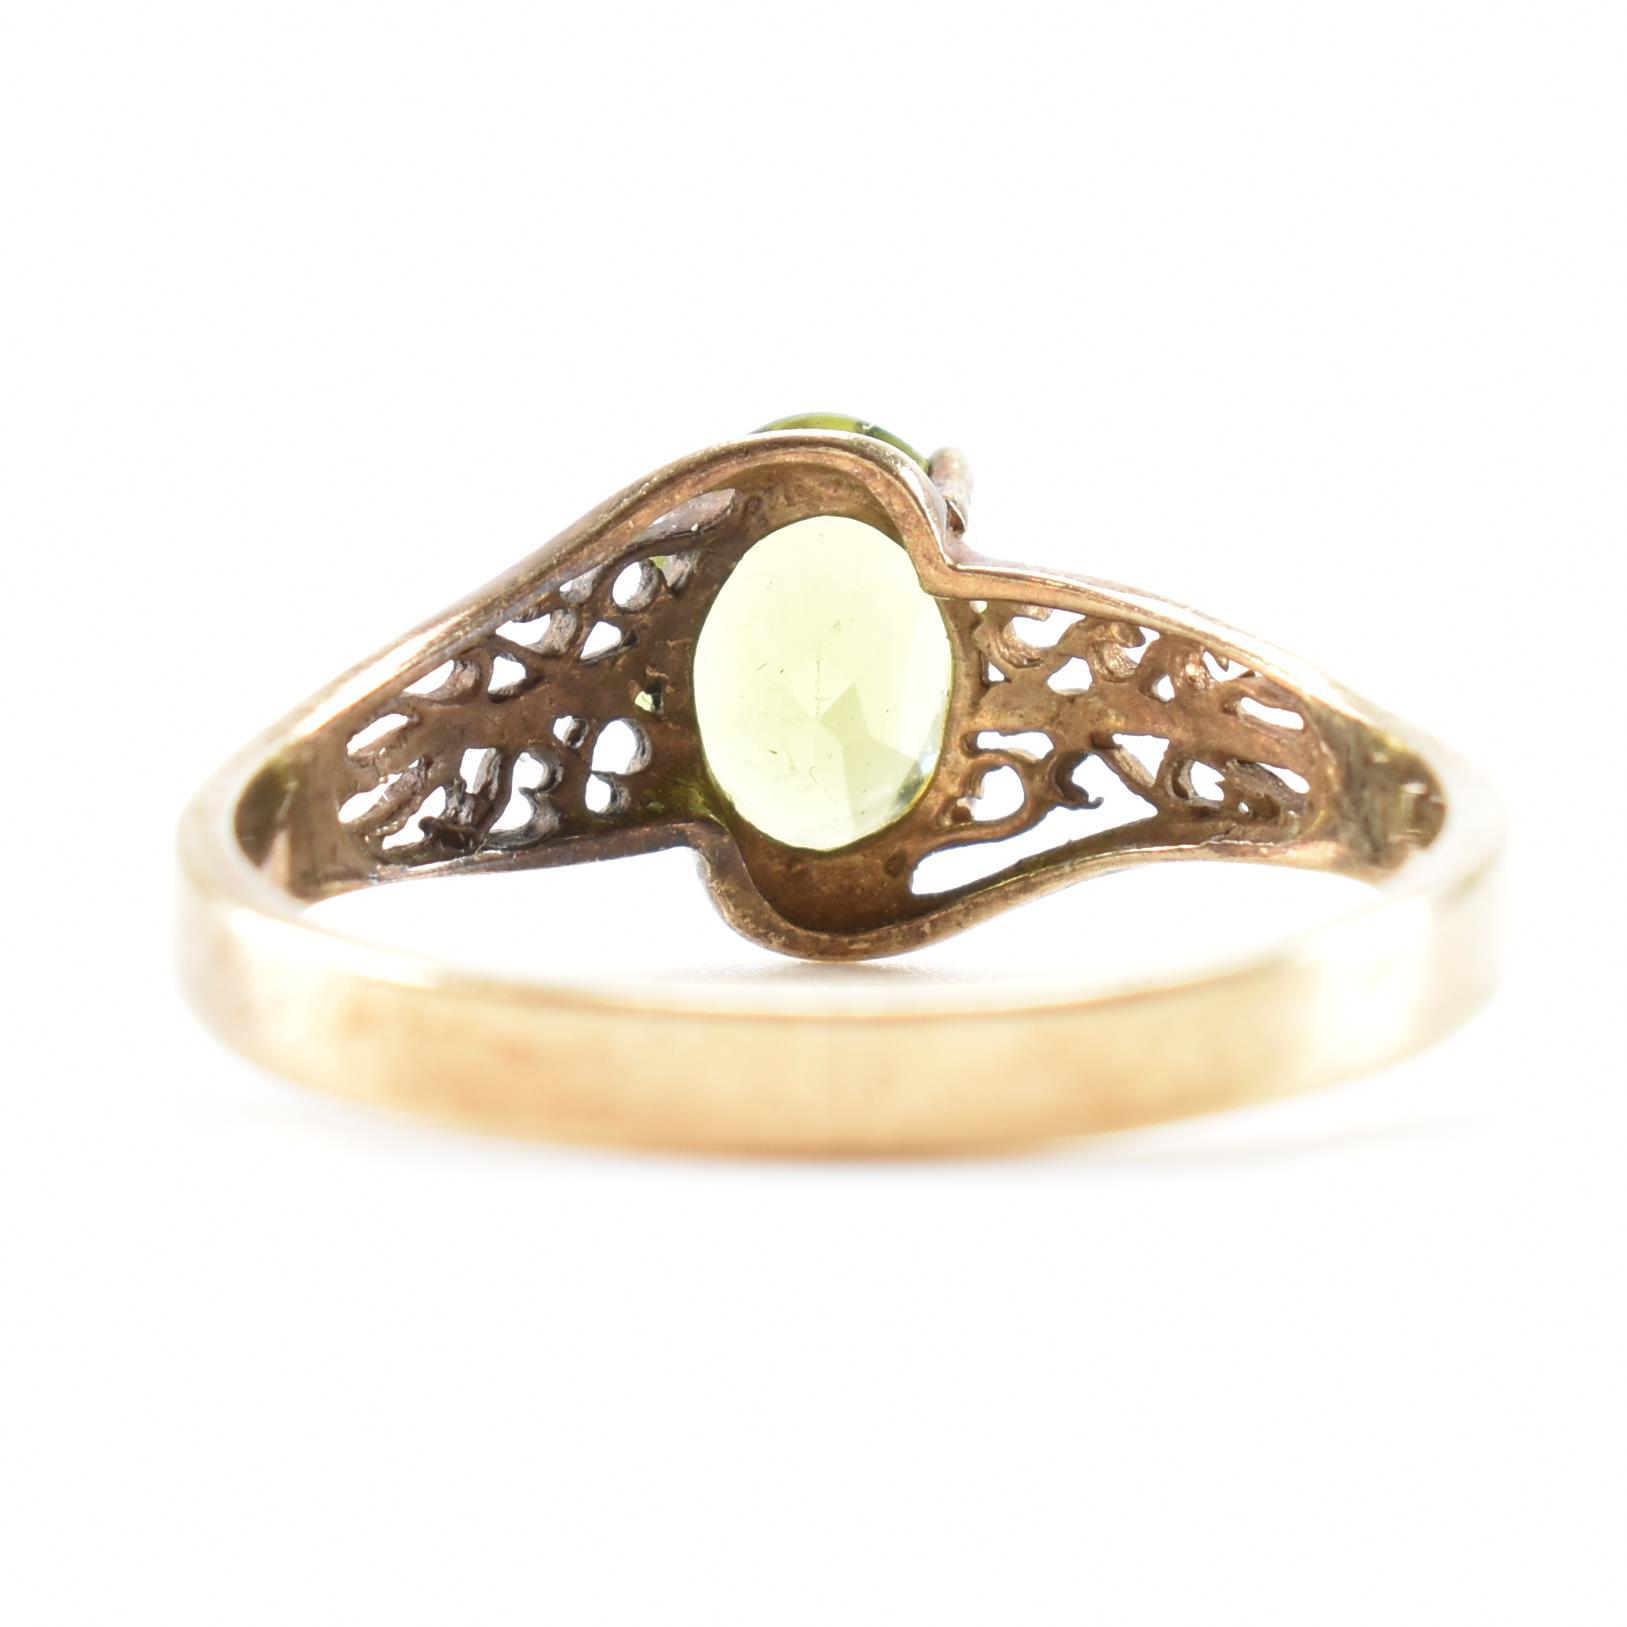 HALLMARKED 9CT GOLD & PERIDOT SOLITAIRE RING - Image 4 of 8